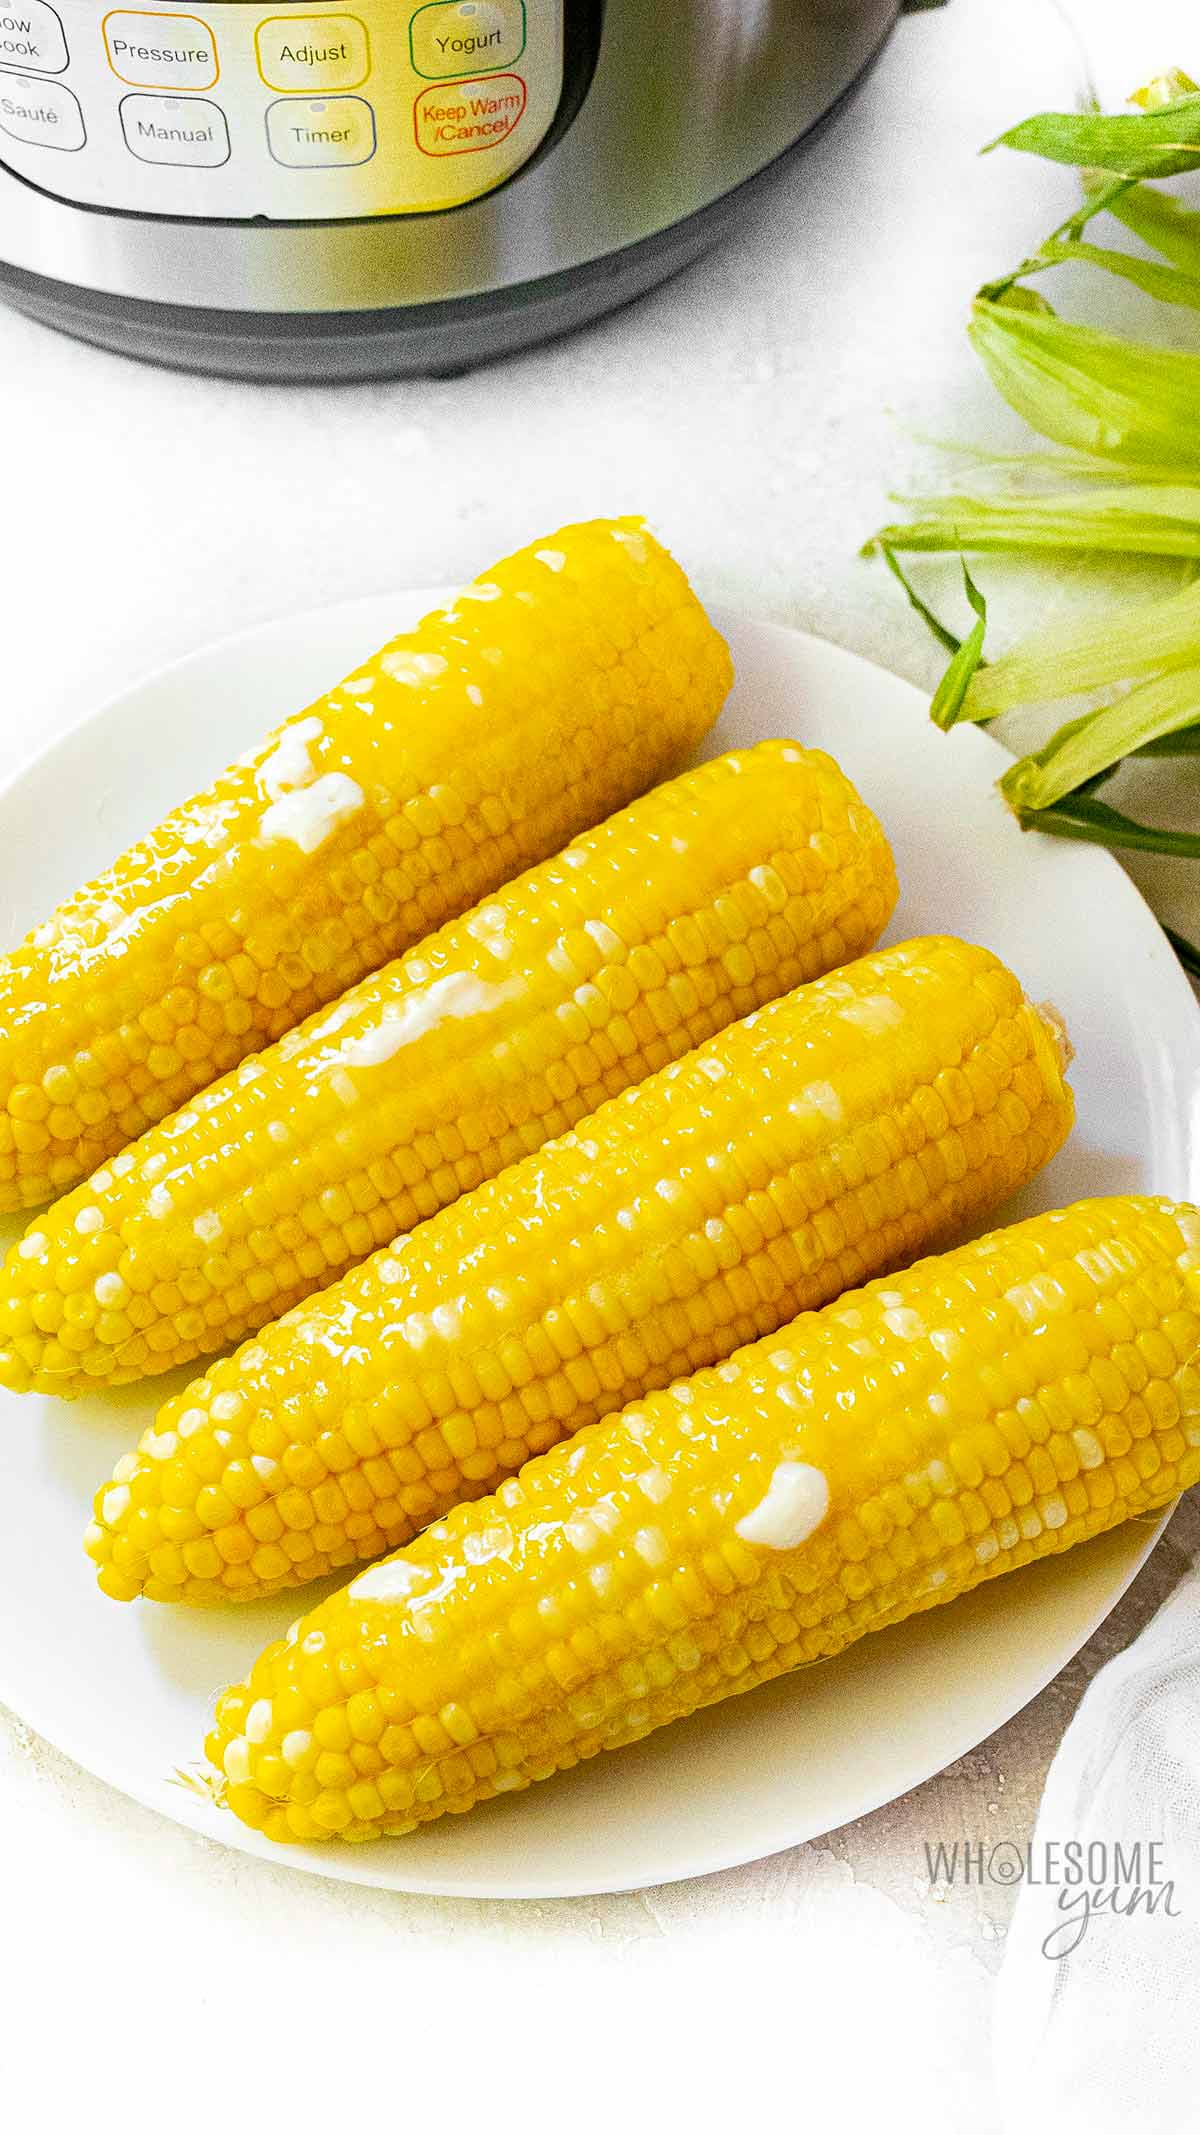 Sliced butter on corn on a plate.